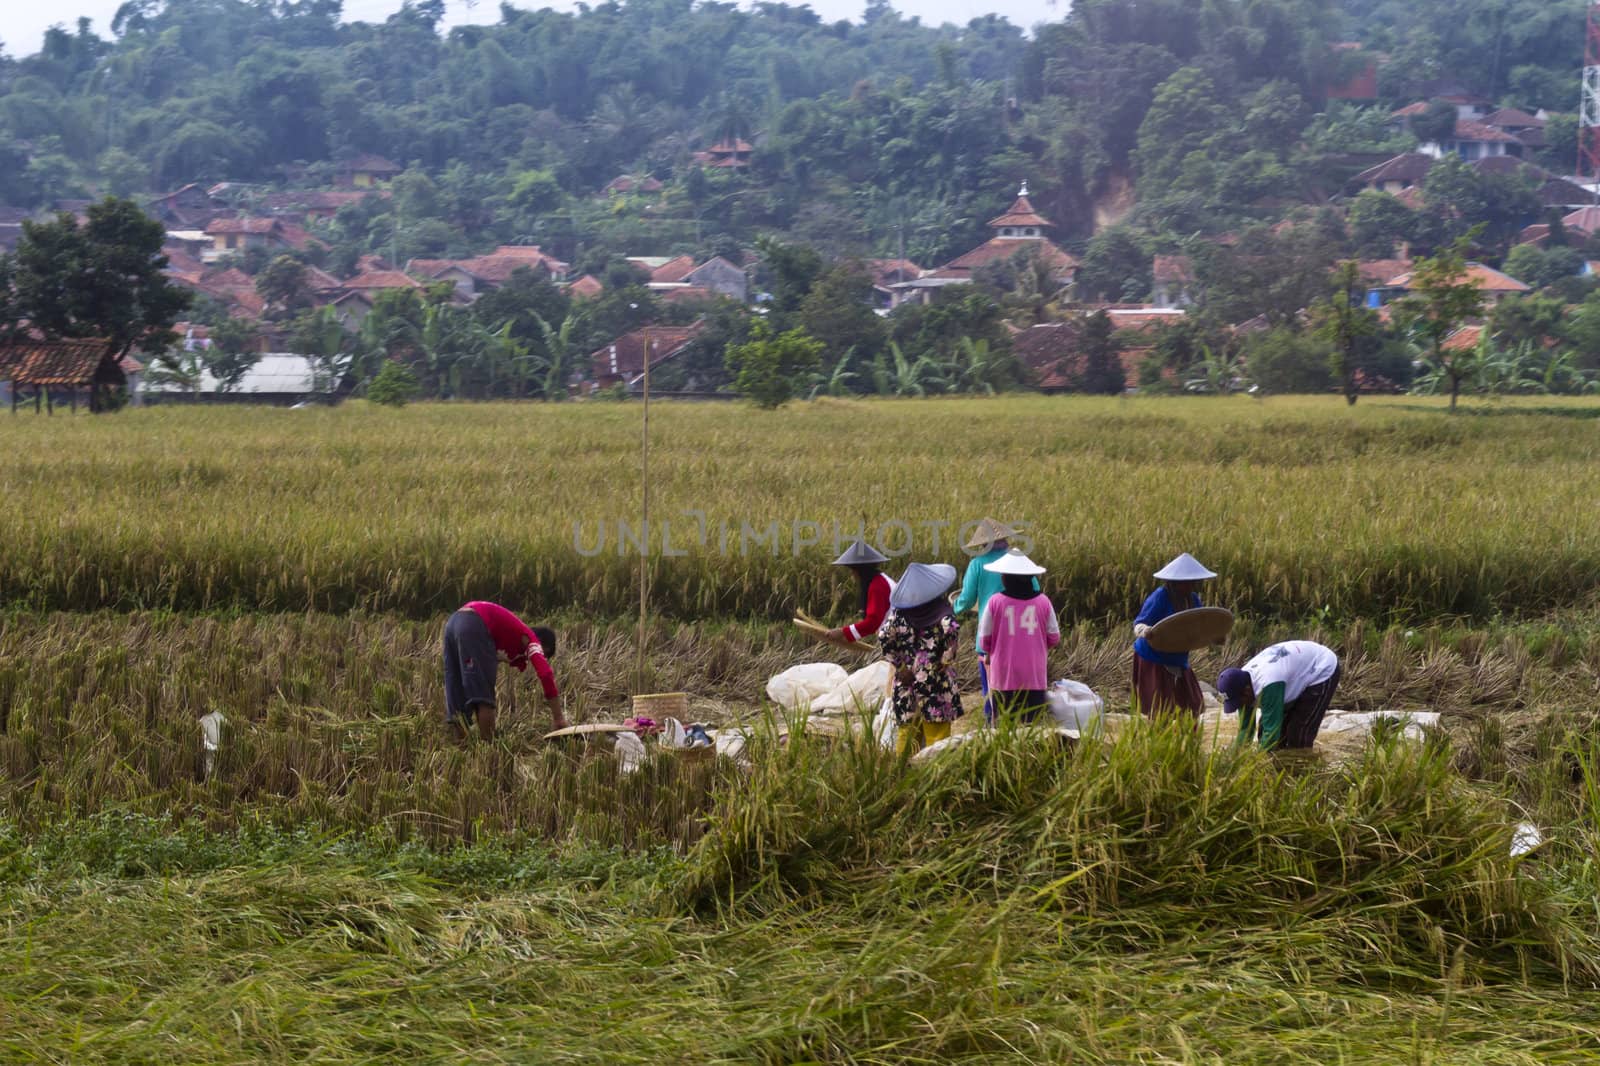 workers work together to harvest paddy in Bandung, West Jawa